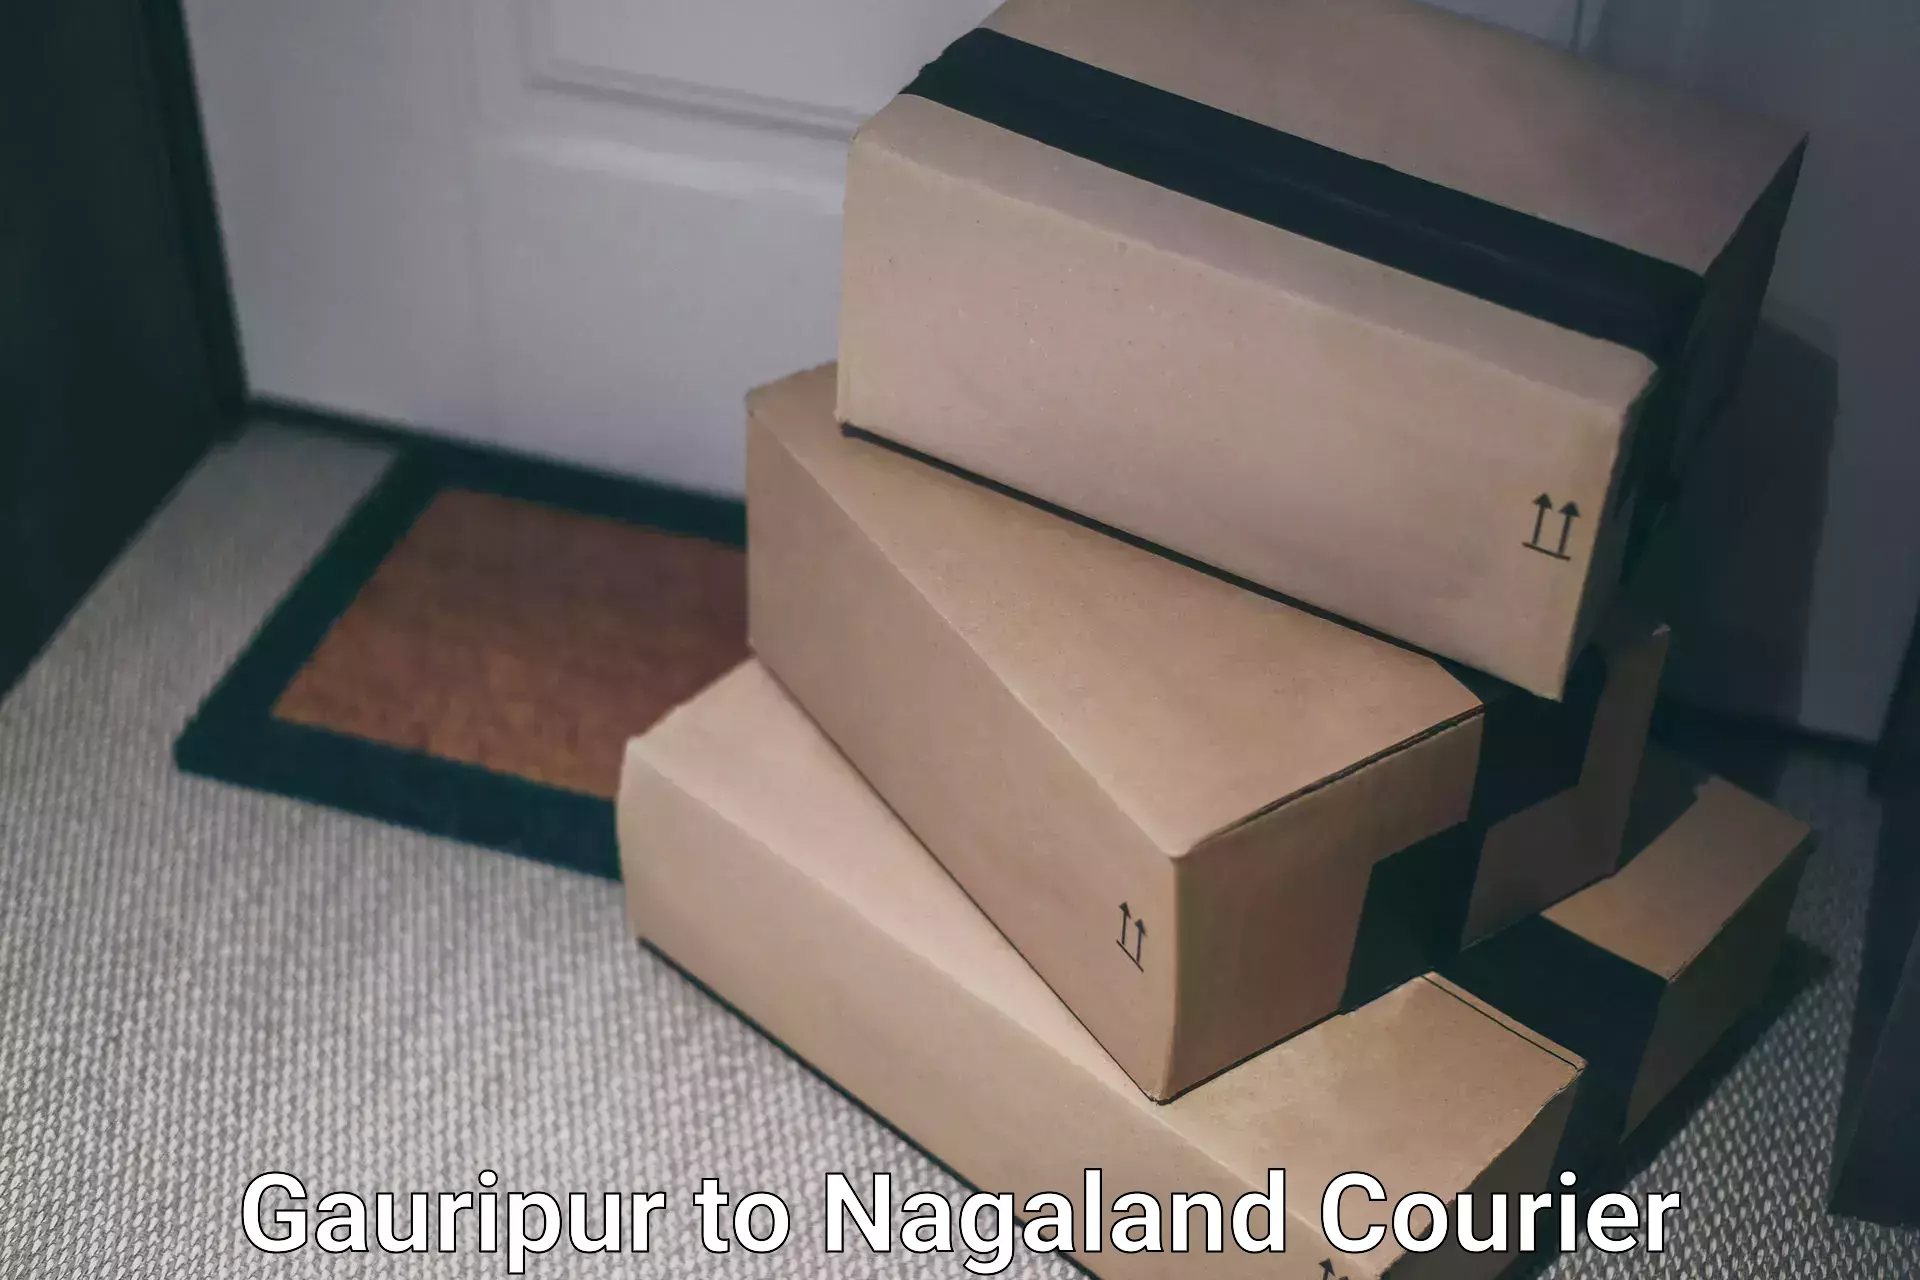 Modern delivery technologies Gauripur to Nagaland